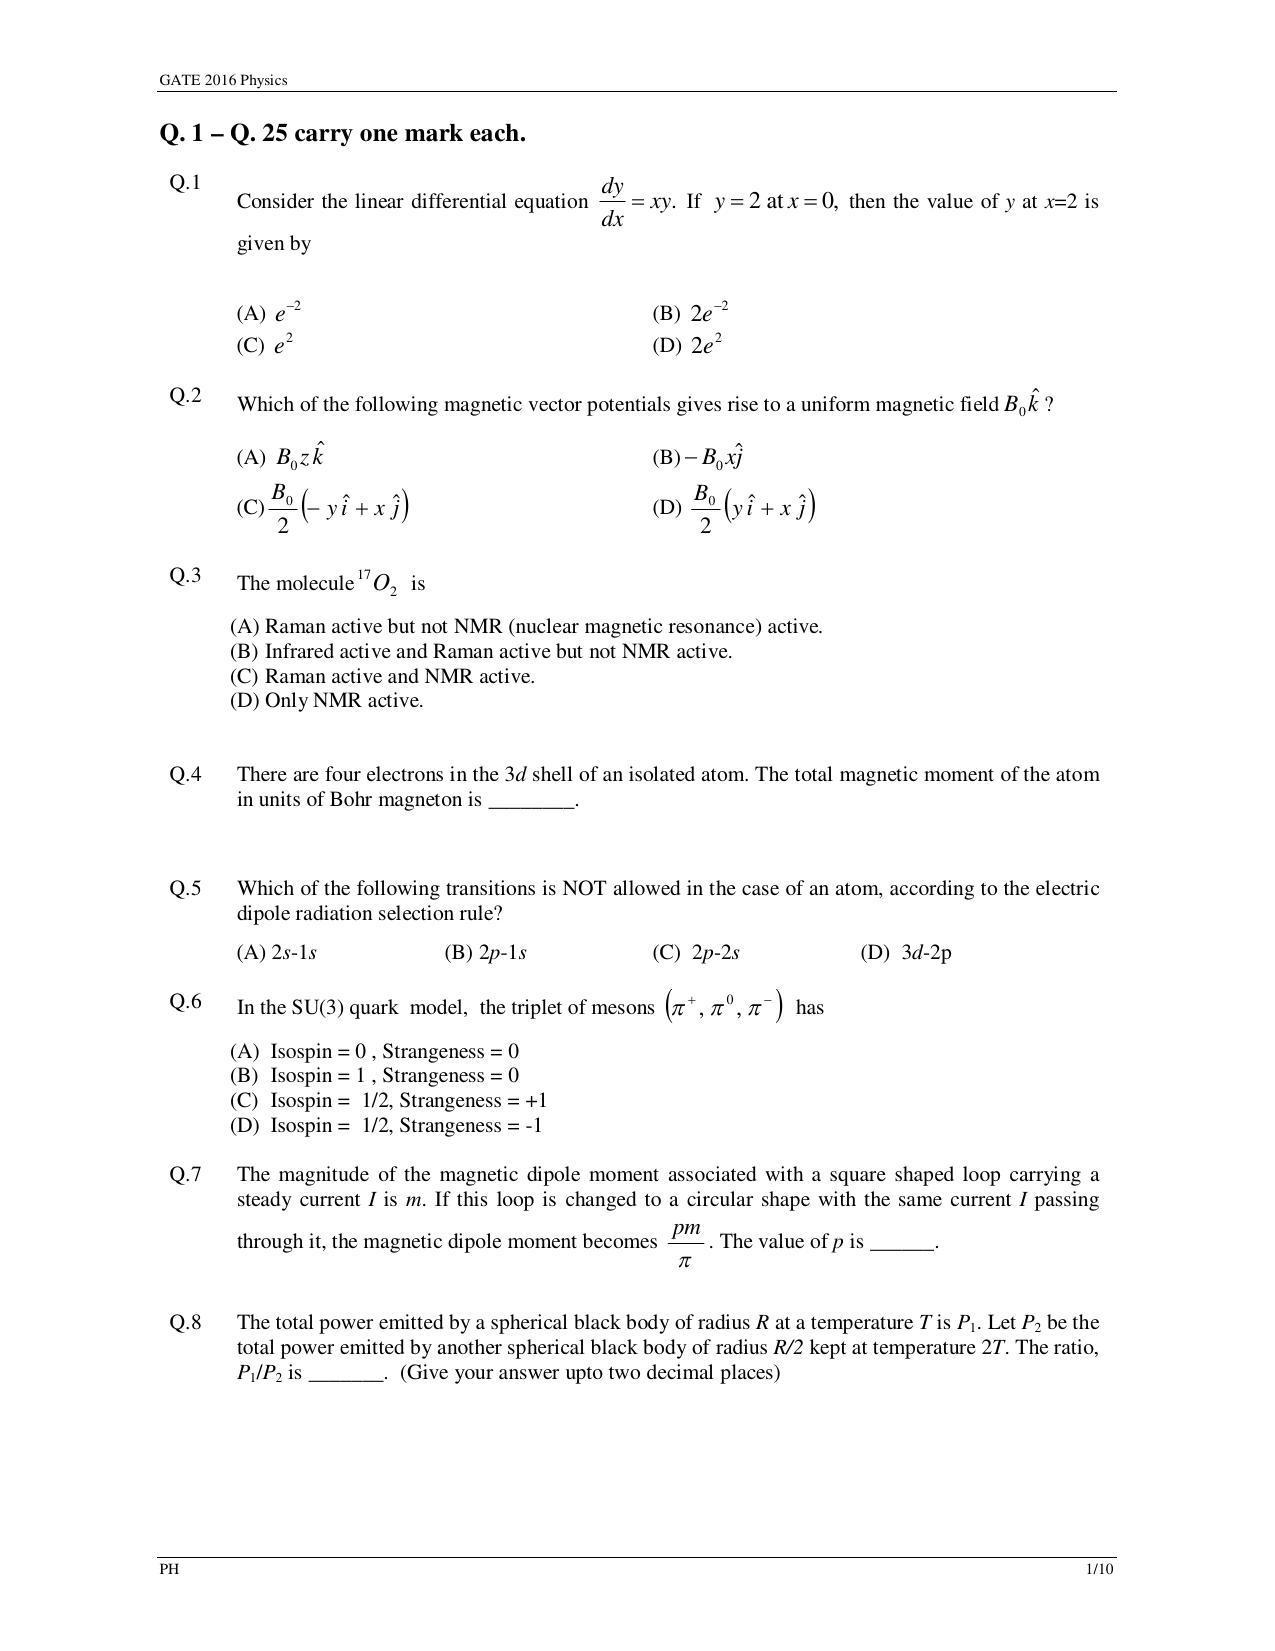 GATE 2016 Physics (PH) Question Paper with Answer Key - Page 4